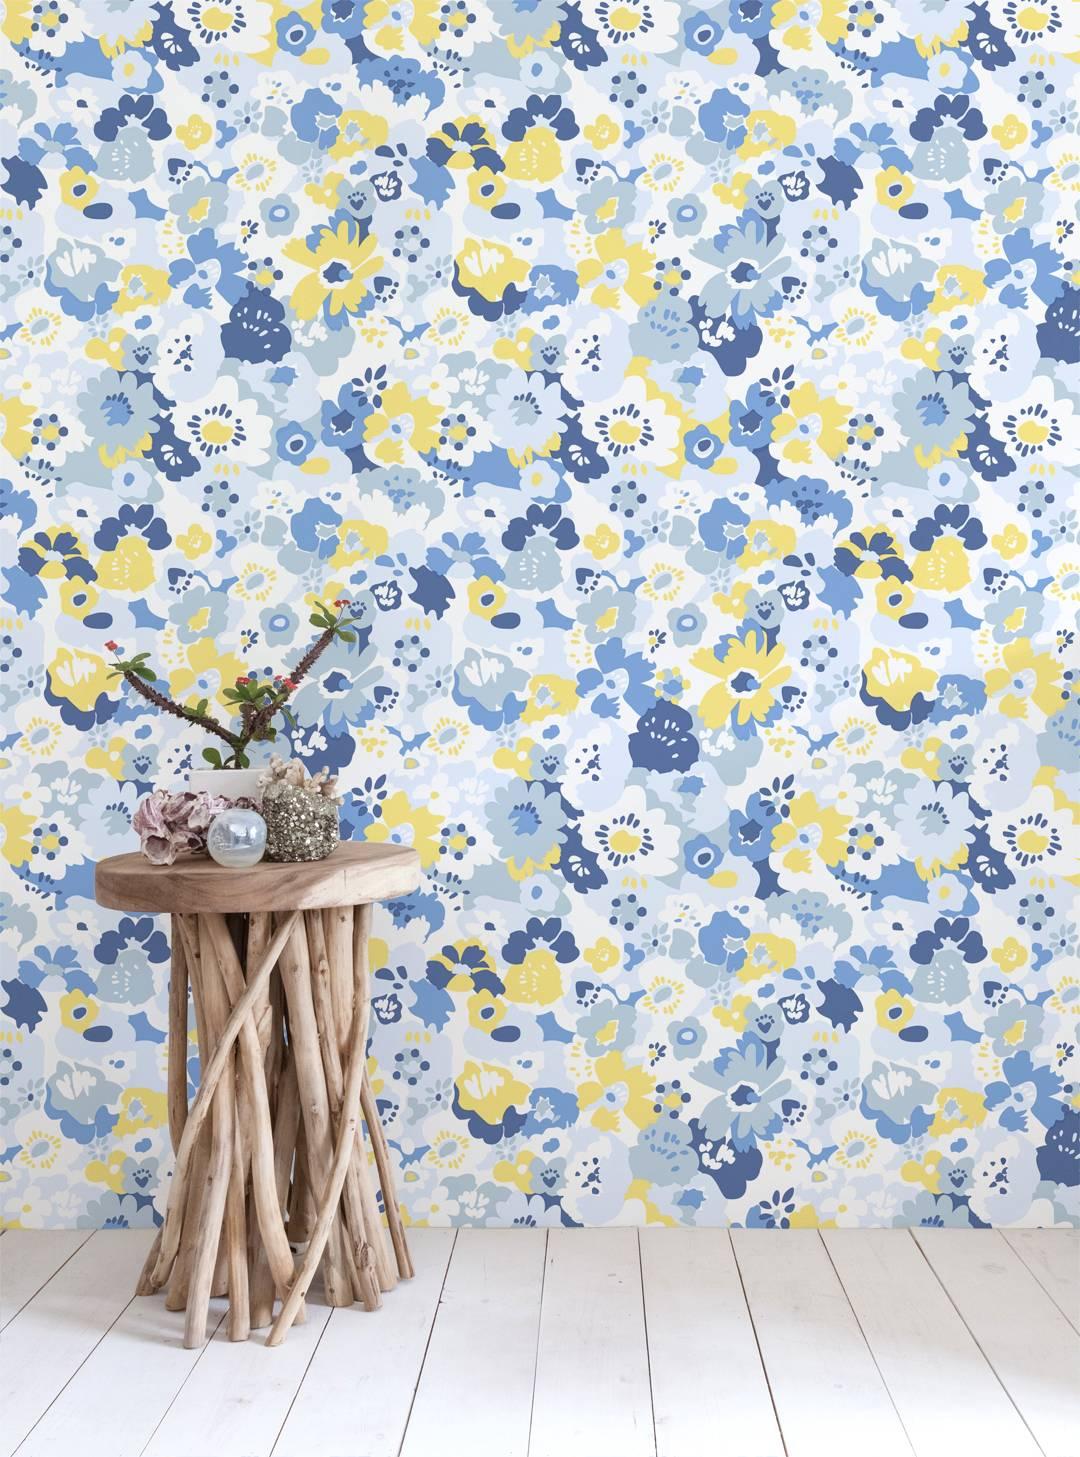 Sophisticated flower power for those who love a chic, feminine print!
 
Samples are available for $18 including US shipping, please message us to purchase.  

Printing: Digital pigment print (minimum order of 4 rolls). 
Material: FSC-certified